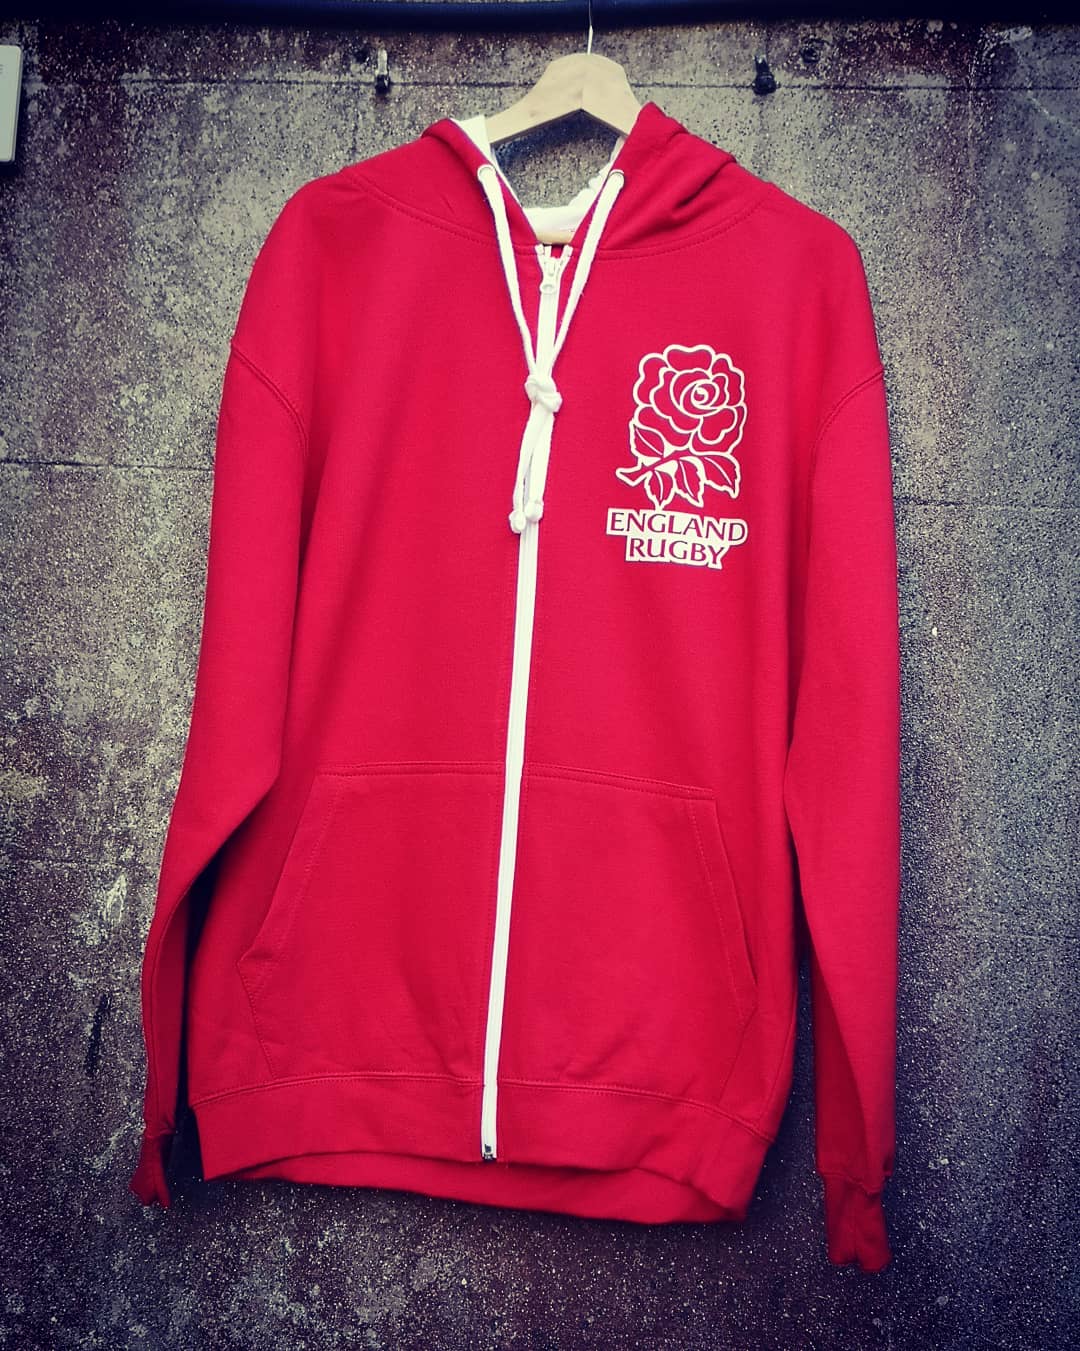 England Rugby World Cup Supporters Zip up Hoodie top S-XXL